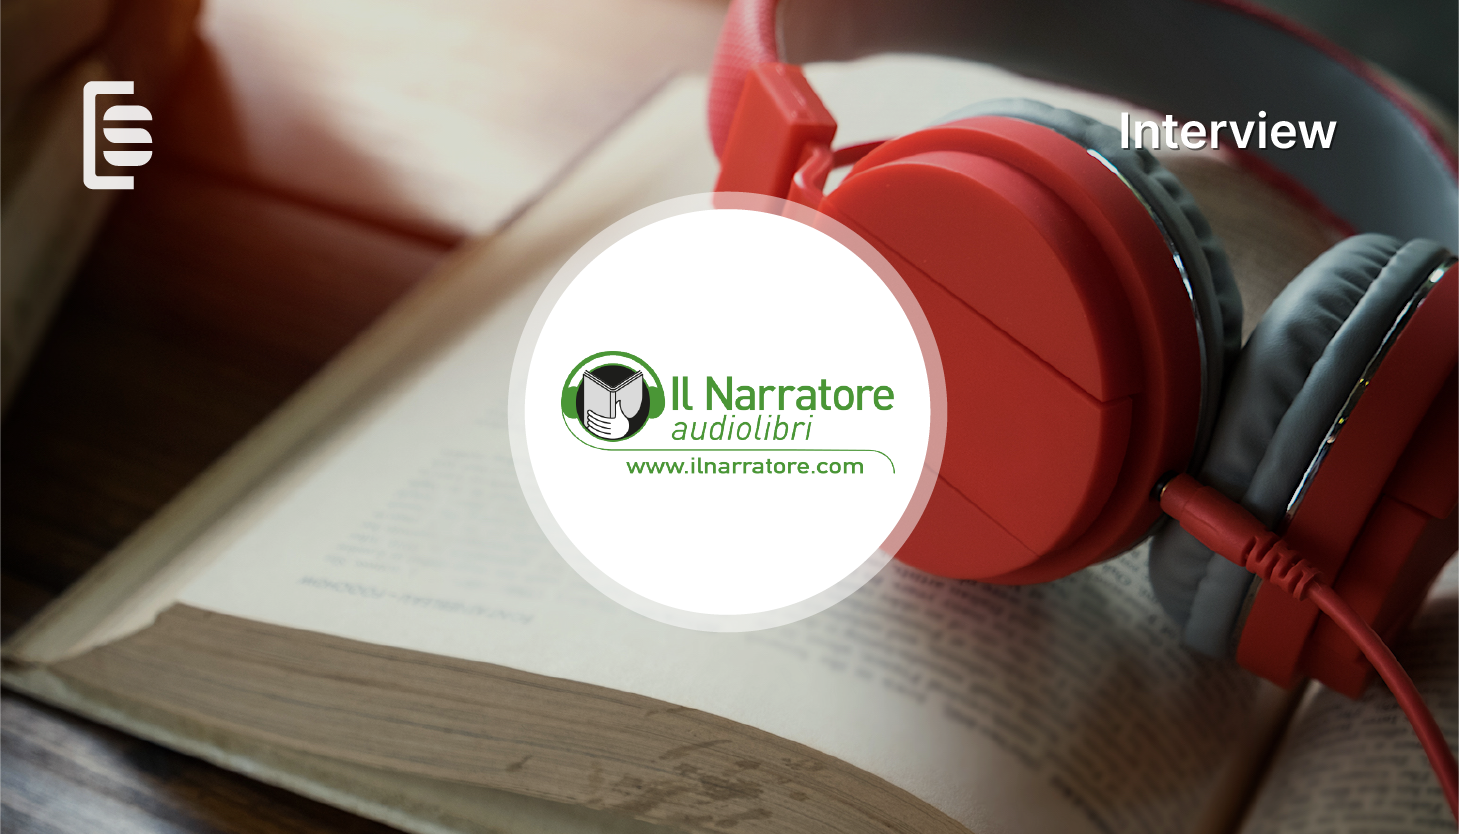 The interviews - Cristiana Giacometti from Il Narratore talks about her twenty-year experience (and some good news!) with audiobooks